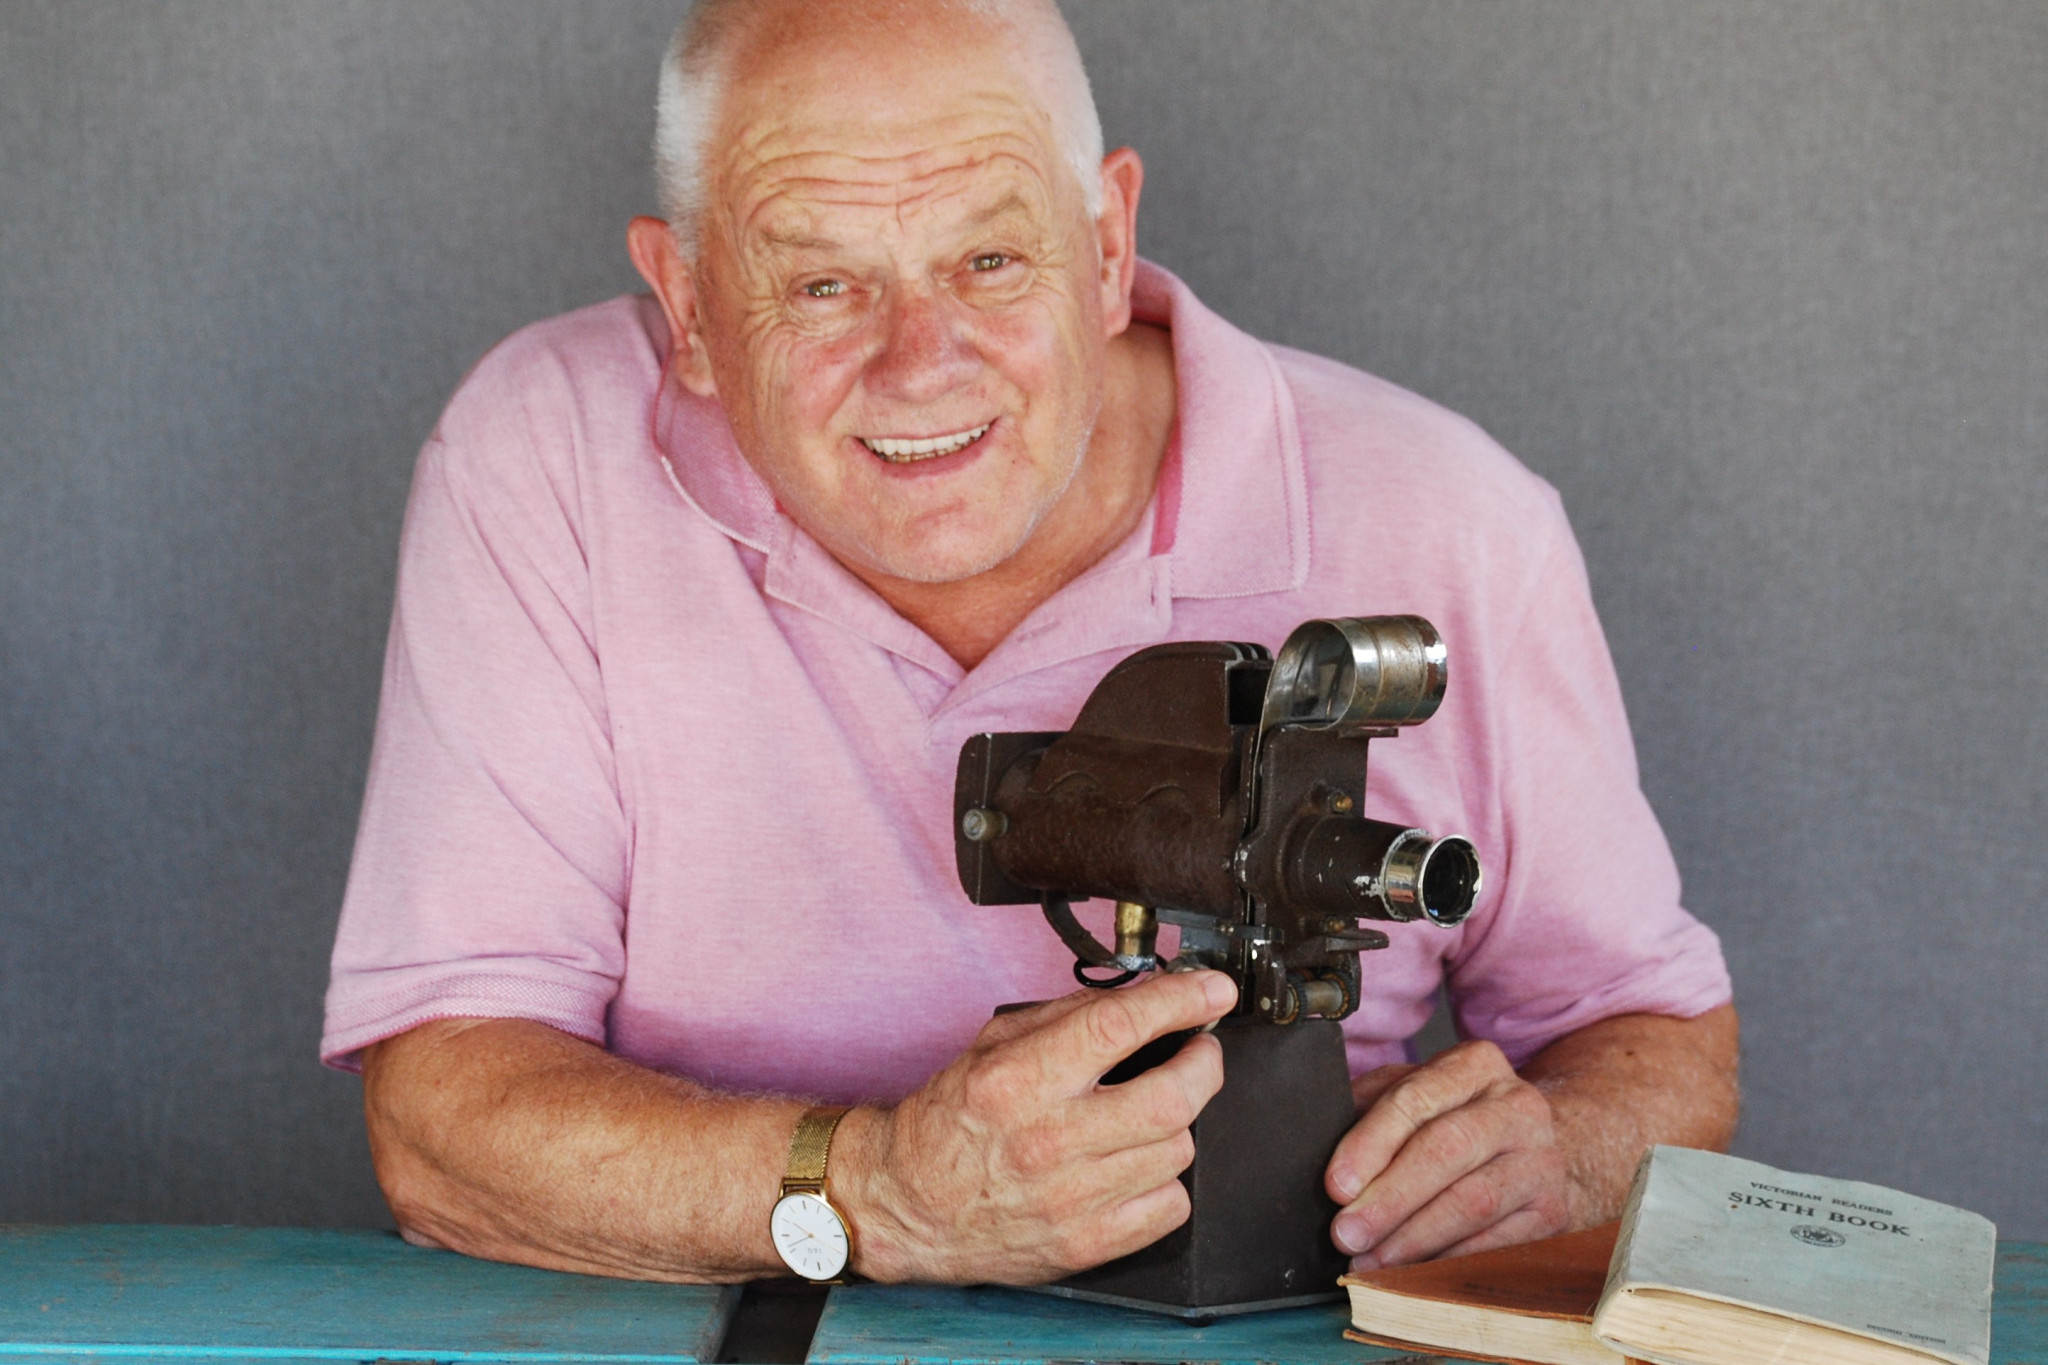 Sheep Hills Reunion committee member and former Sheep Hills state school student Barry Wright reacquaints himself with a piece of history from his school days - a 35mm film strip projector.